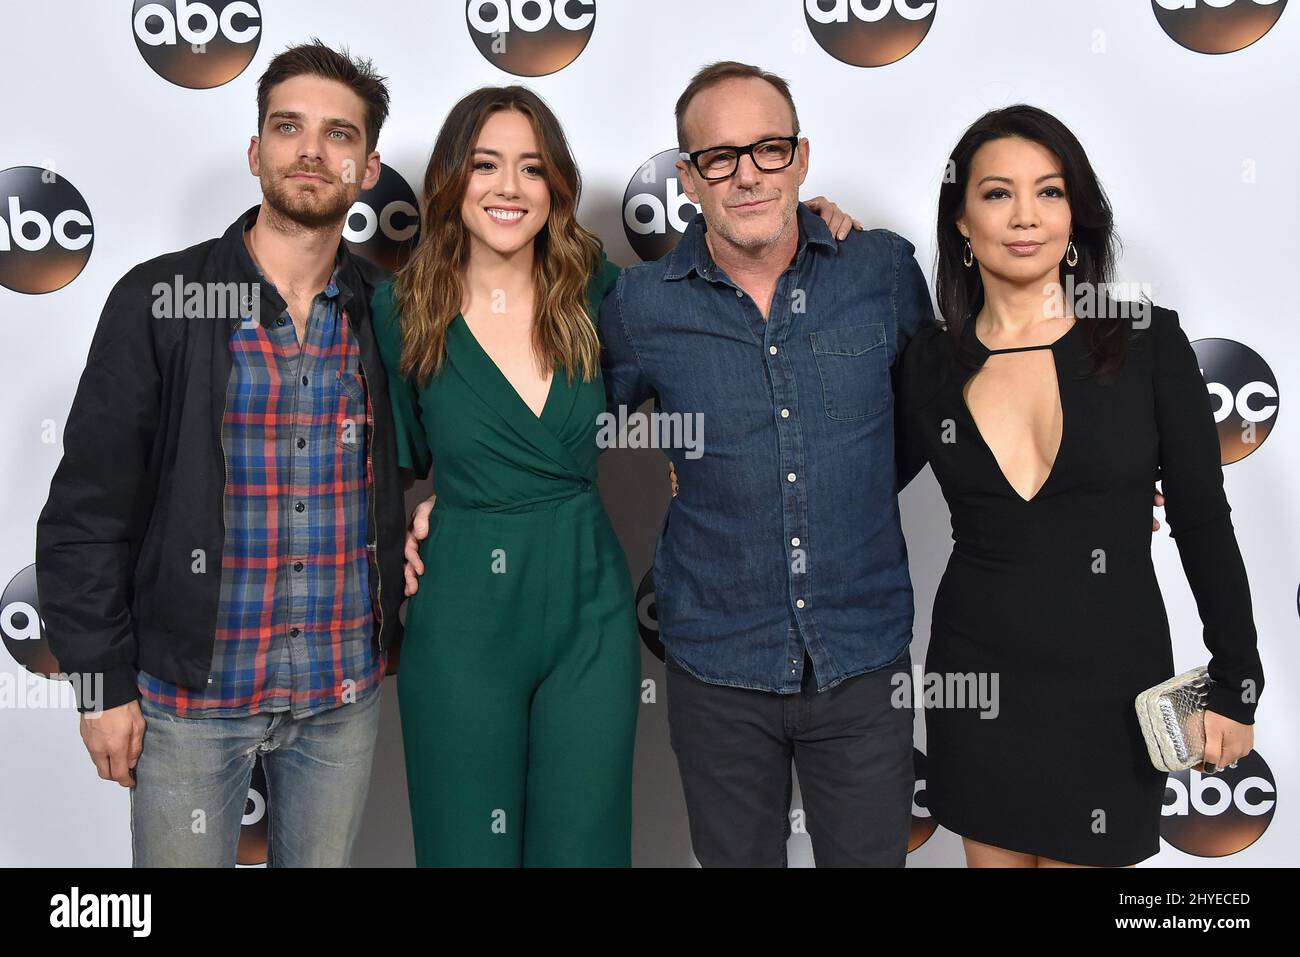 Jeff Ward, Chloe Bennet, Clark Gregg and Ming-Na Wen at the ABC TCA Winter Press Tour 2018 Red Carpet Event event at Langham Huntington Hotel on January 8, 2018 in Pasadena, CA. Stock Photo